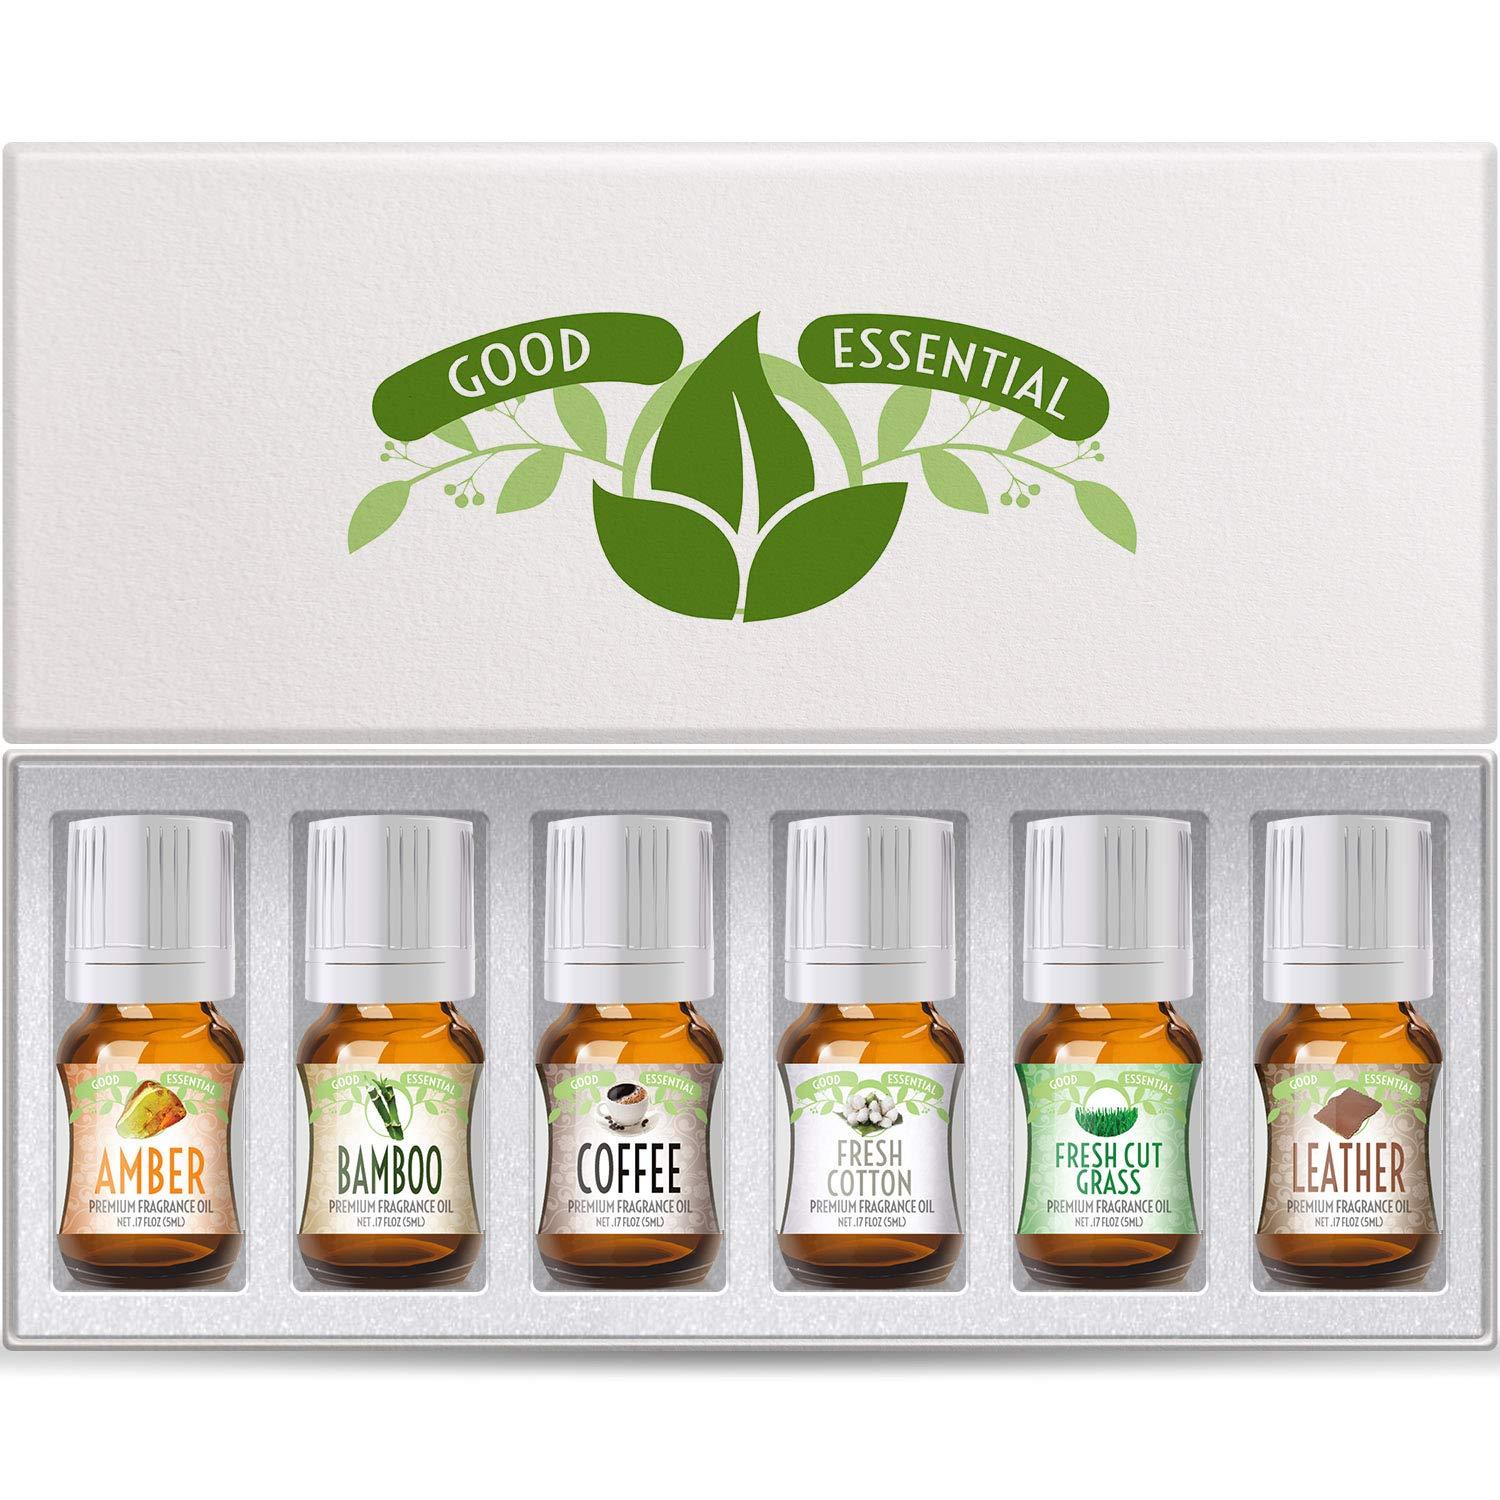 Fragrance Oils Set of 6 Scented Oils from Good Essential - Amber Oil Coffee  Oil Leather Oil Fresh Cotton Oil Fresh Cut Grass Oil Bamboo Oil:  Aromatherapy Perfume Soaps Candles Slime Lotions!